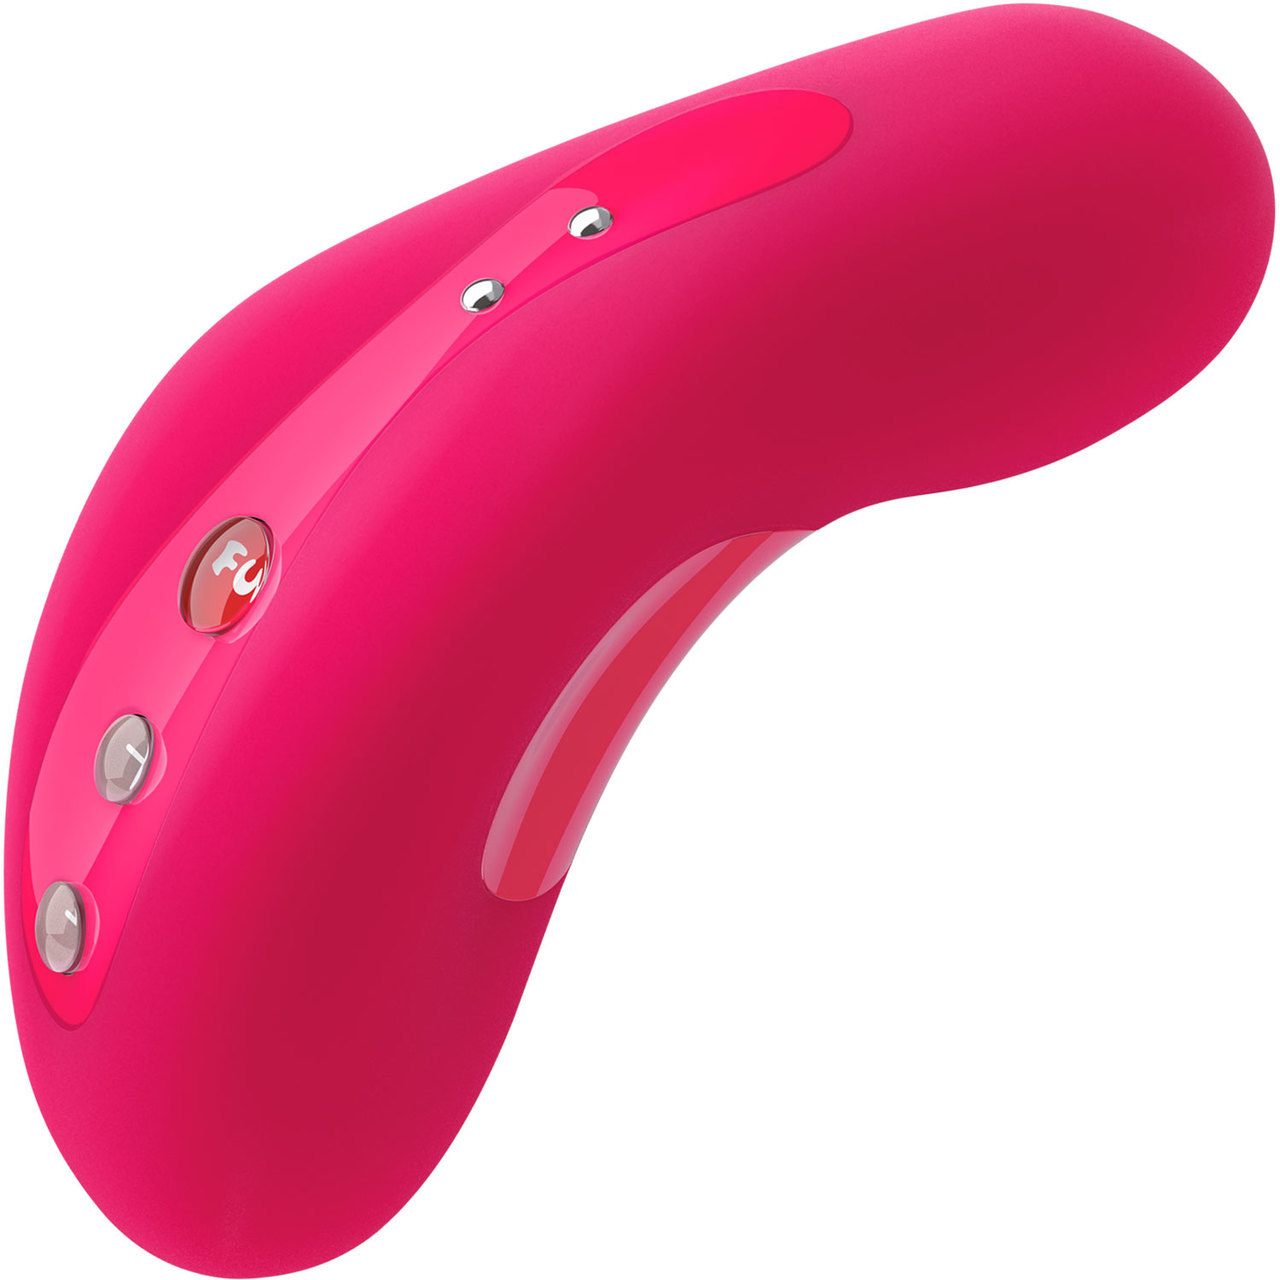 Fun Factory Laya II Powerful Rechargeable Lay-On Clitoral Vibrator